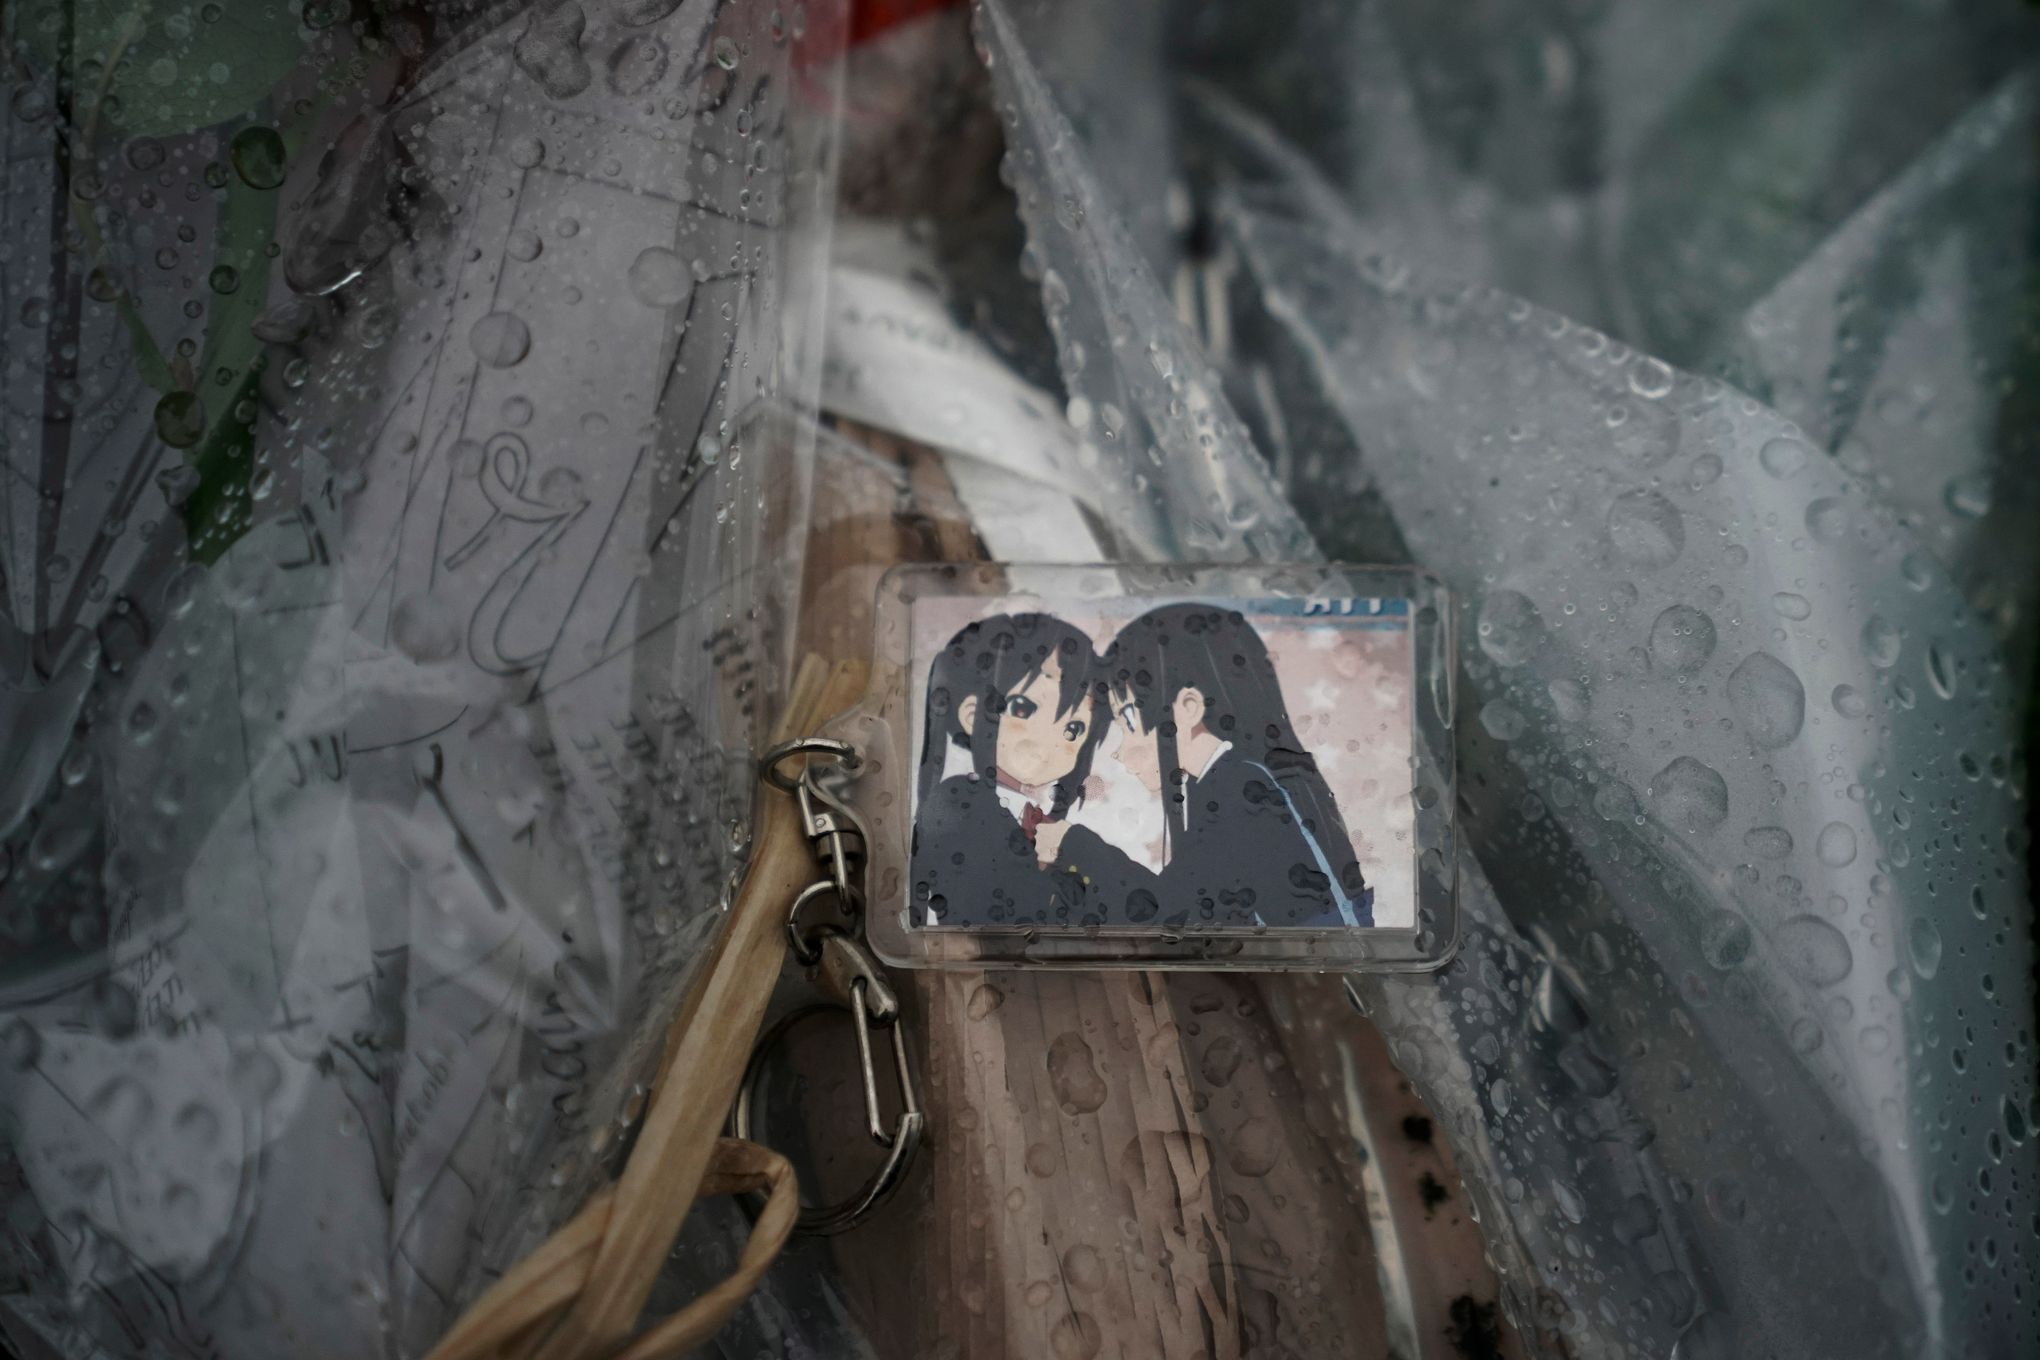 10 dead in suspected arson attack at KyoAni anime studio (UPDATED)